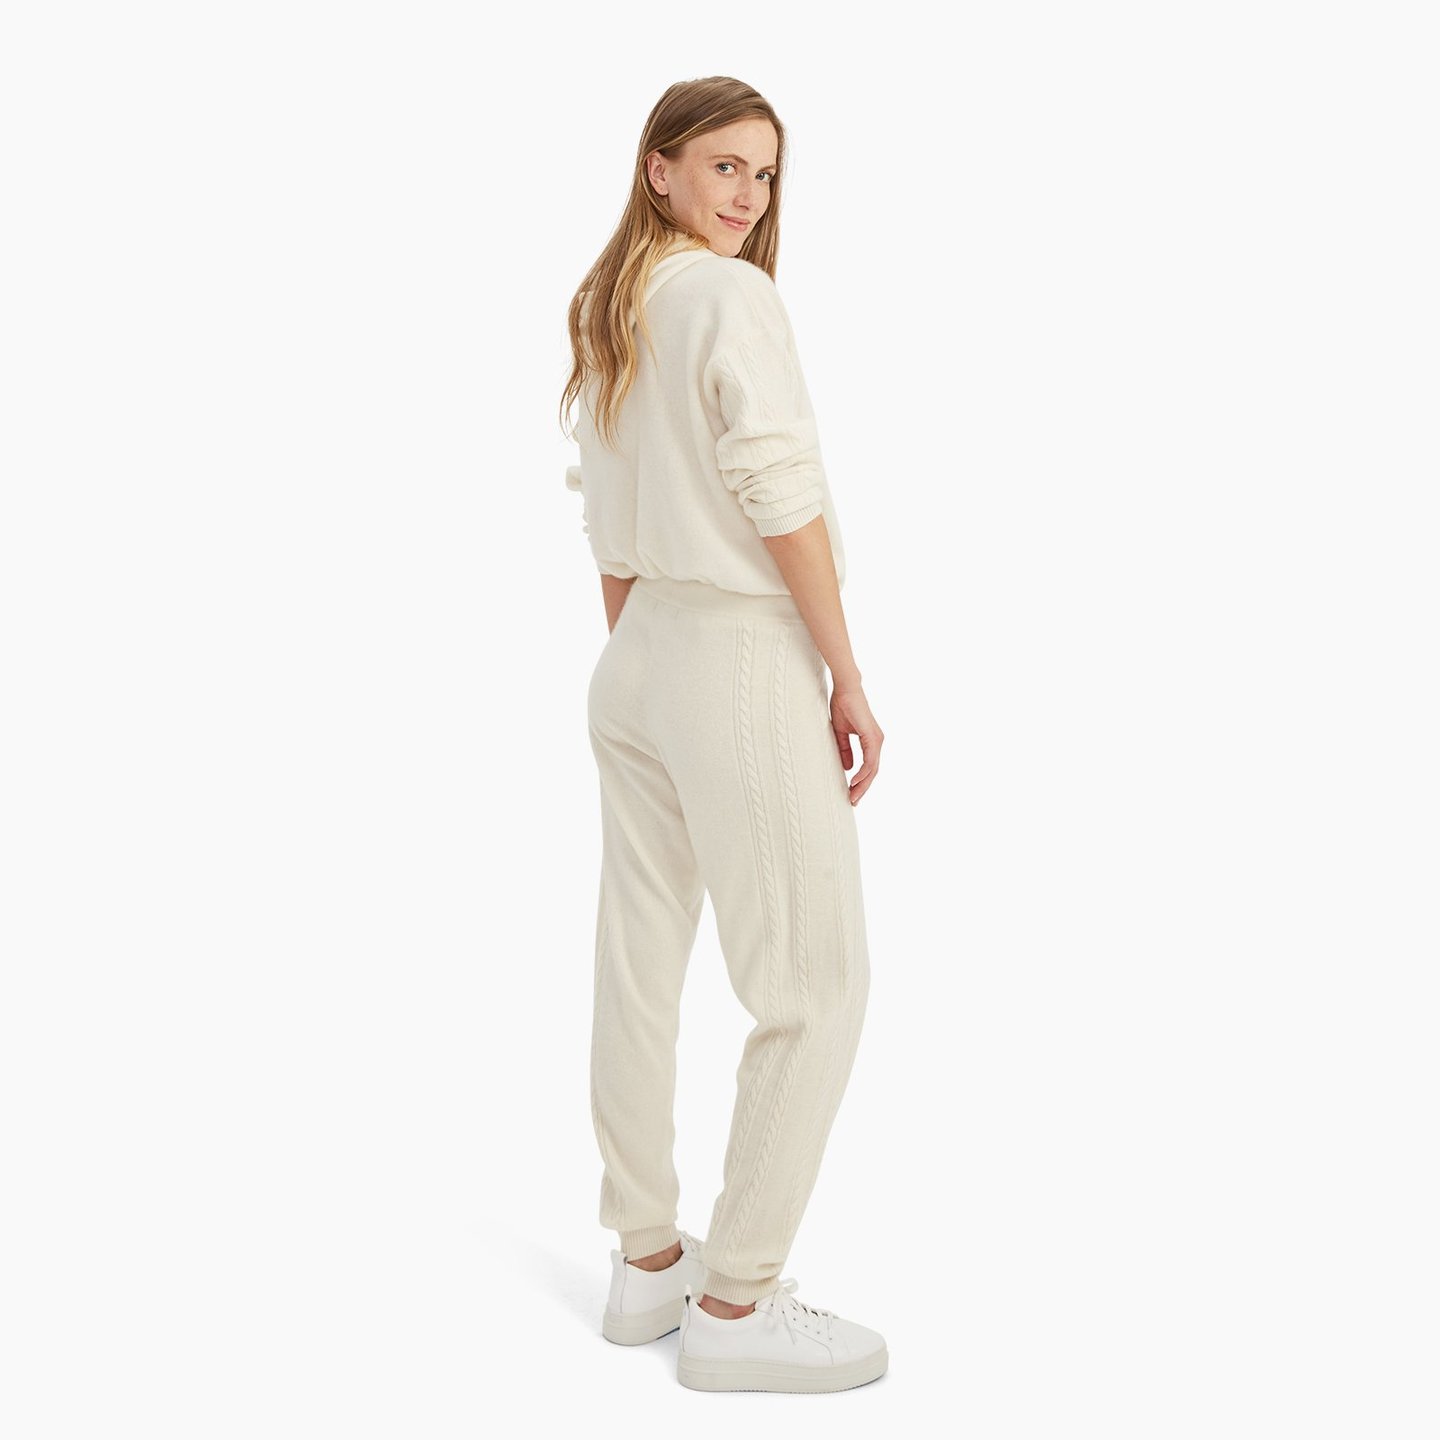 NWEB000842_Cashmere_Cable_Jogger_White_011_1440x.jpg